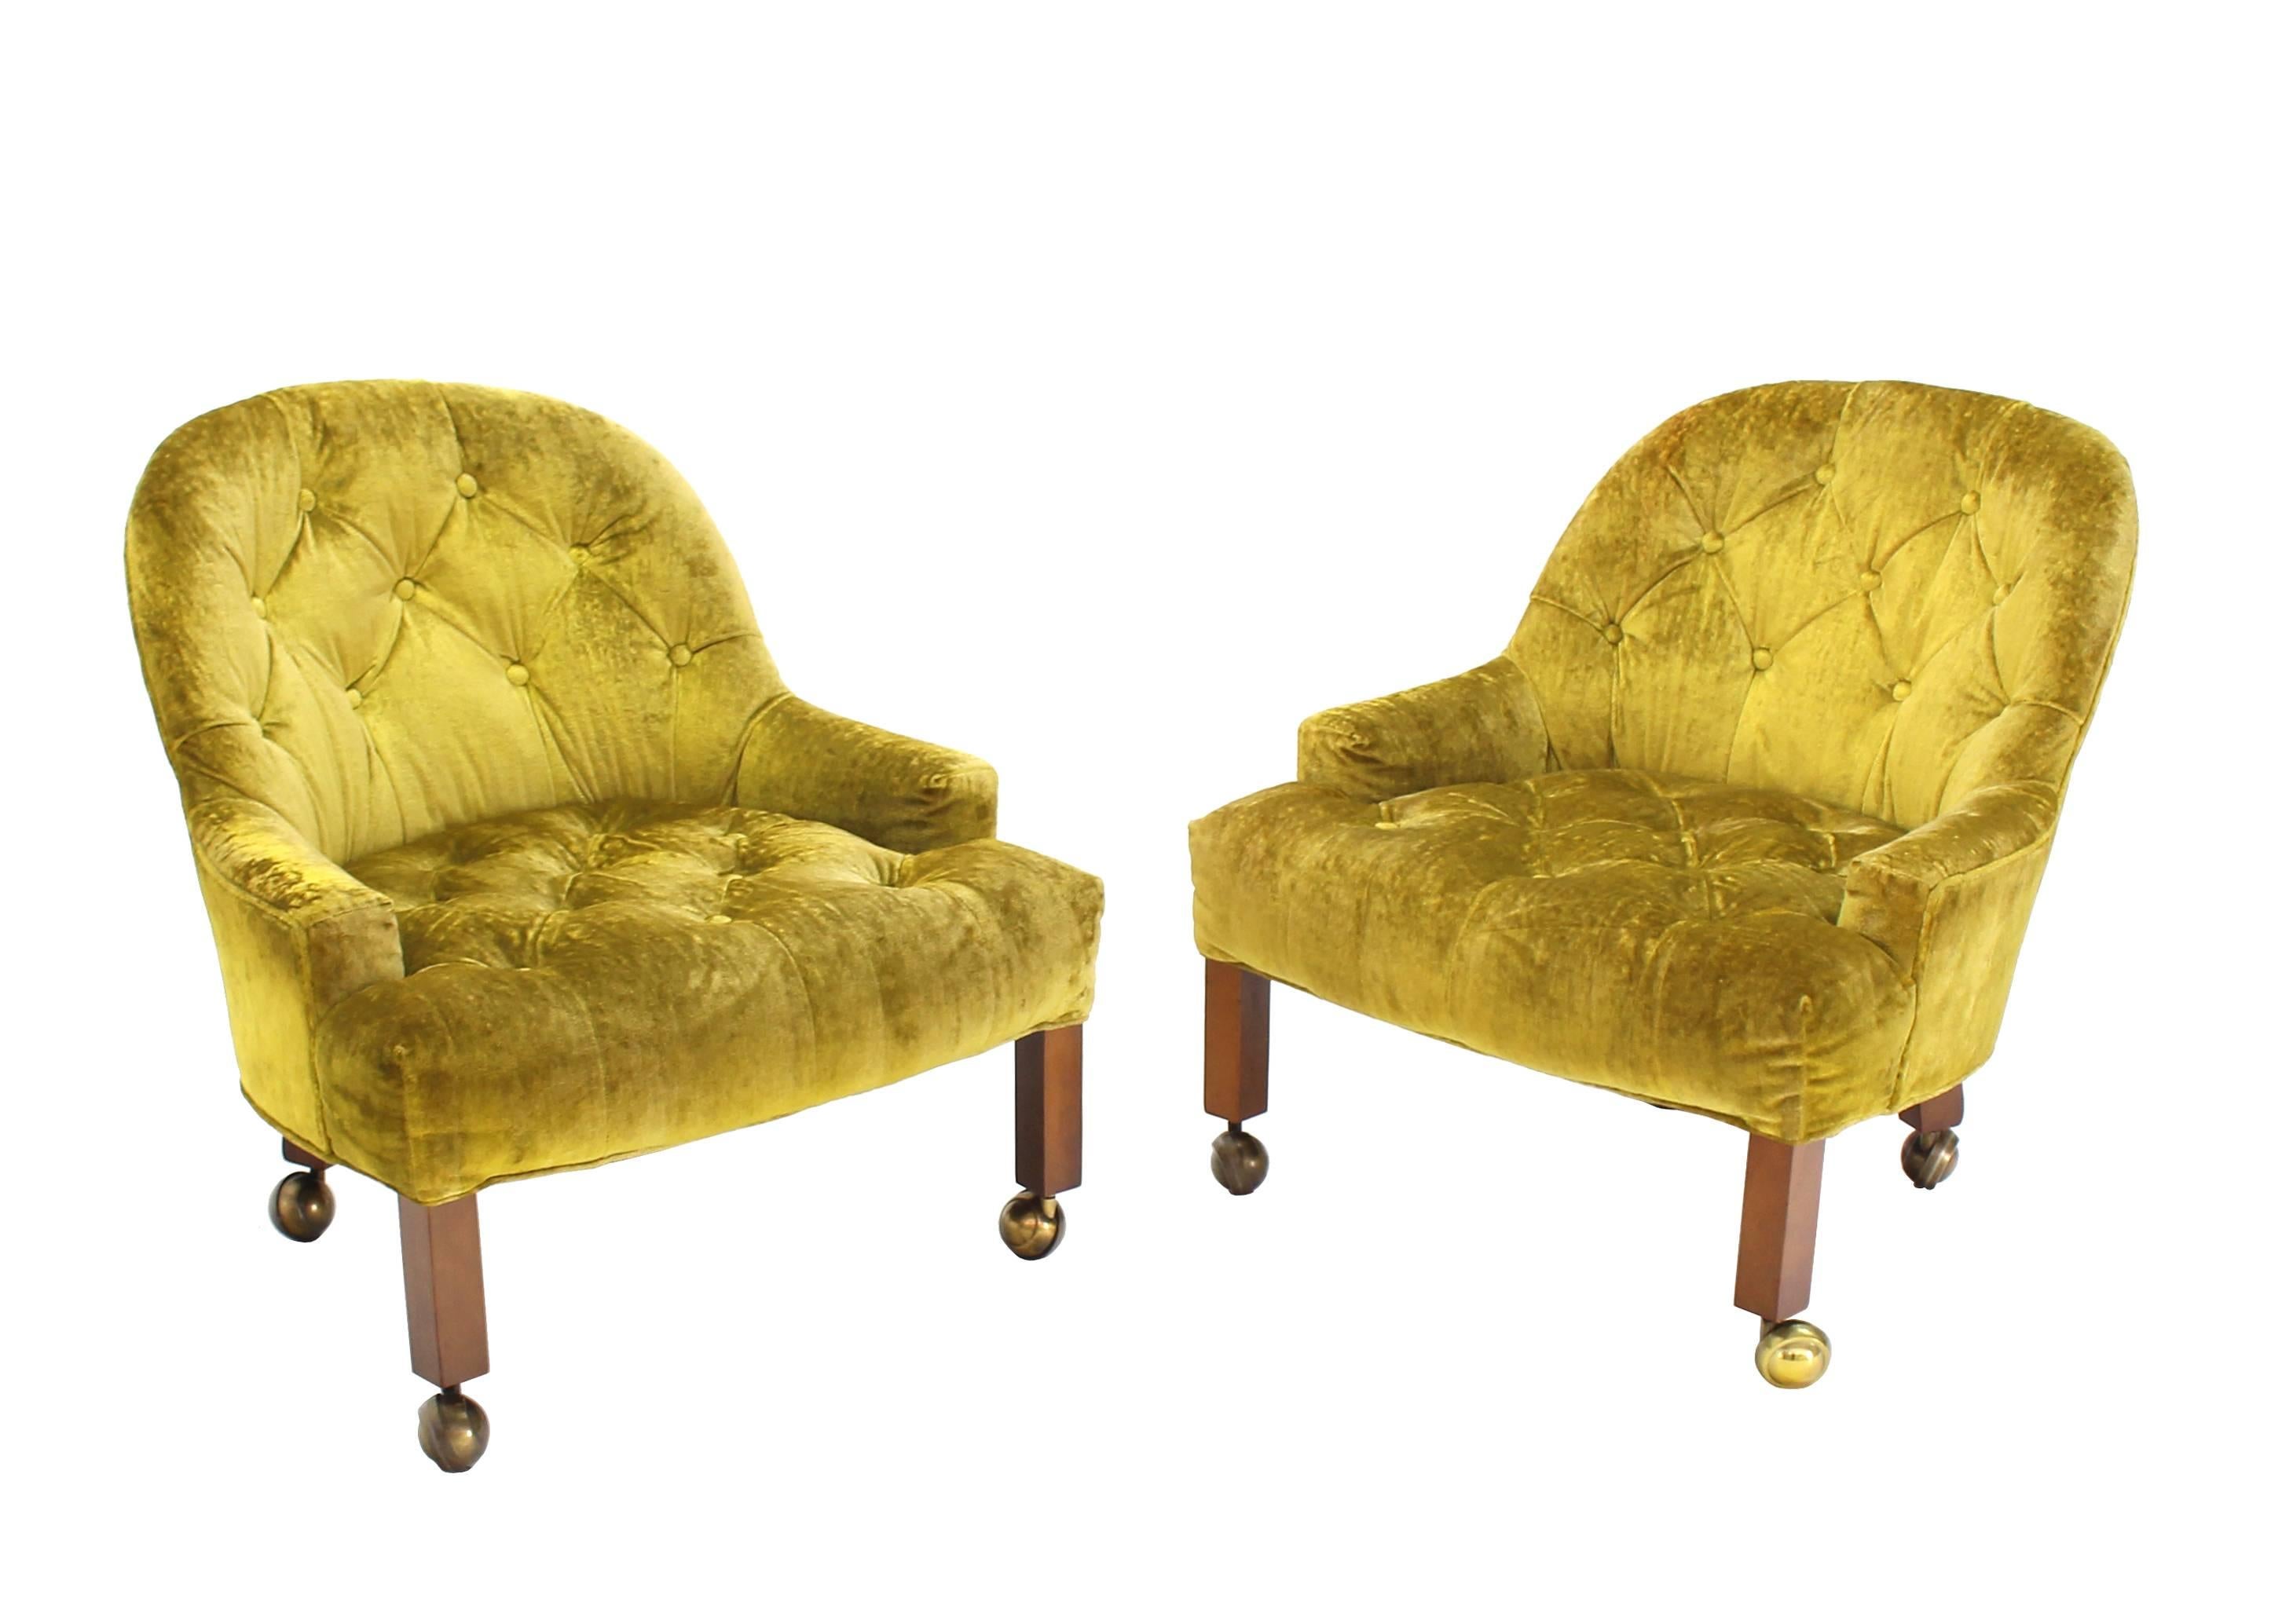 Pair of very nice Mid-Century Modern velvet tufted upholstery lounge chairs.